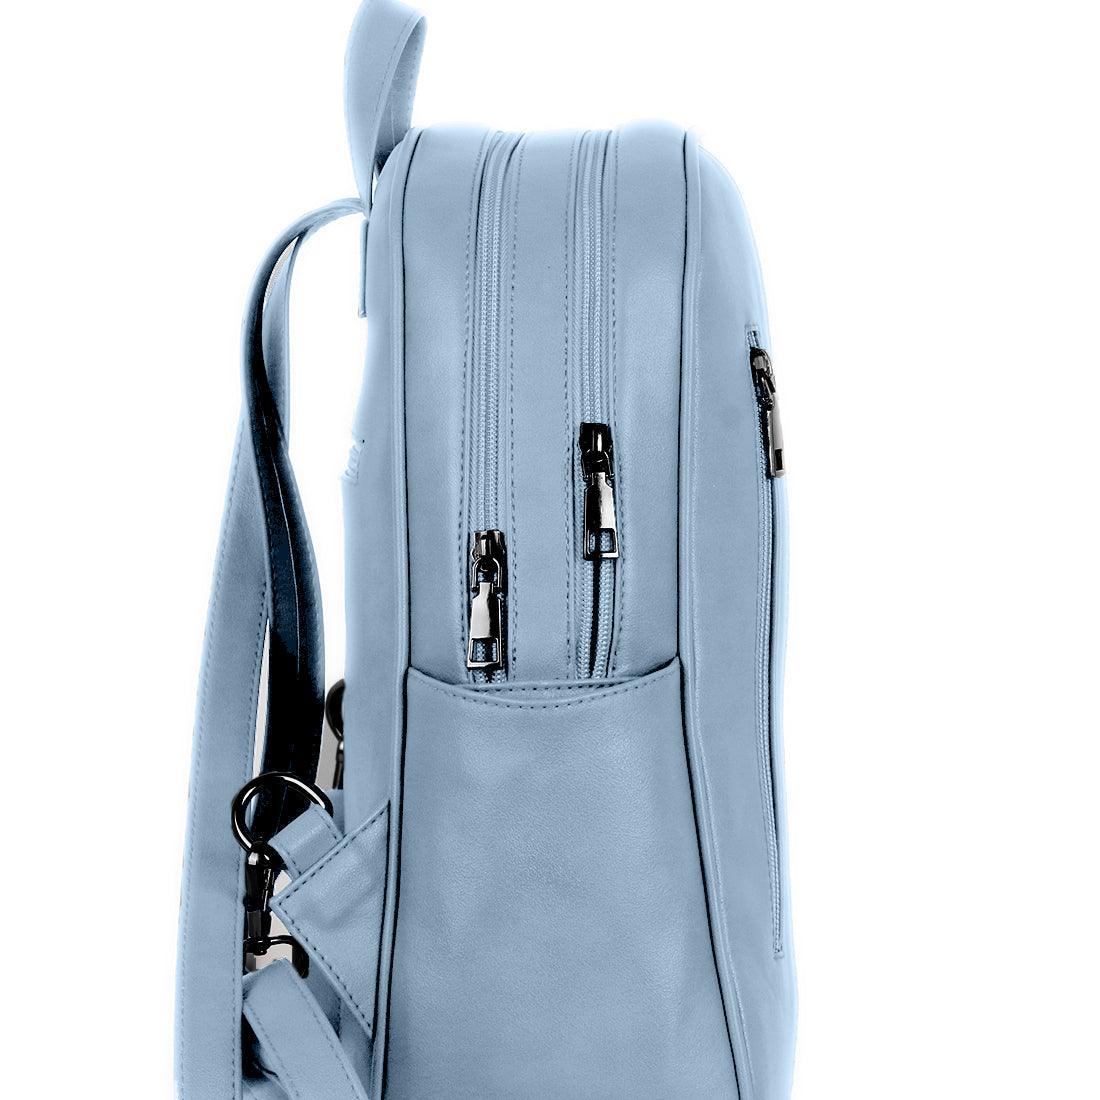 Blue Mixed Backpack GRL PWR - CANVAEGYPT